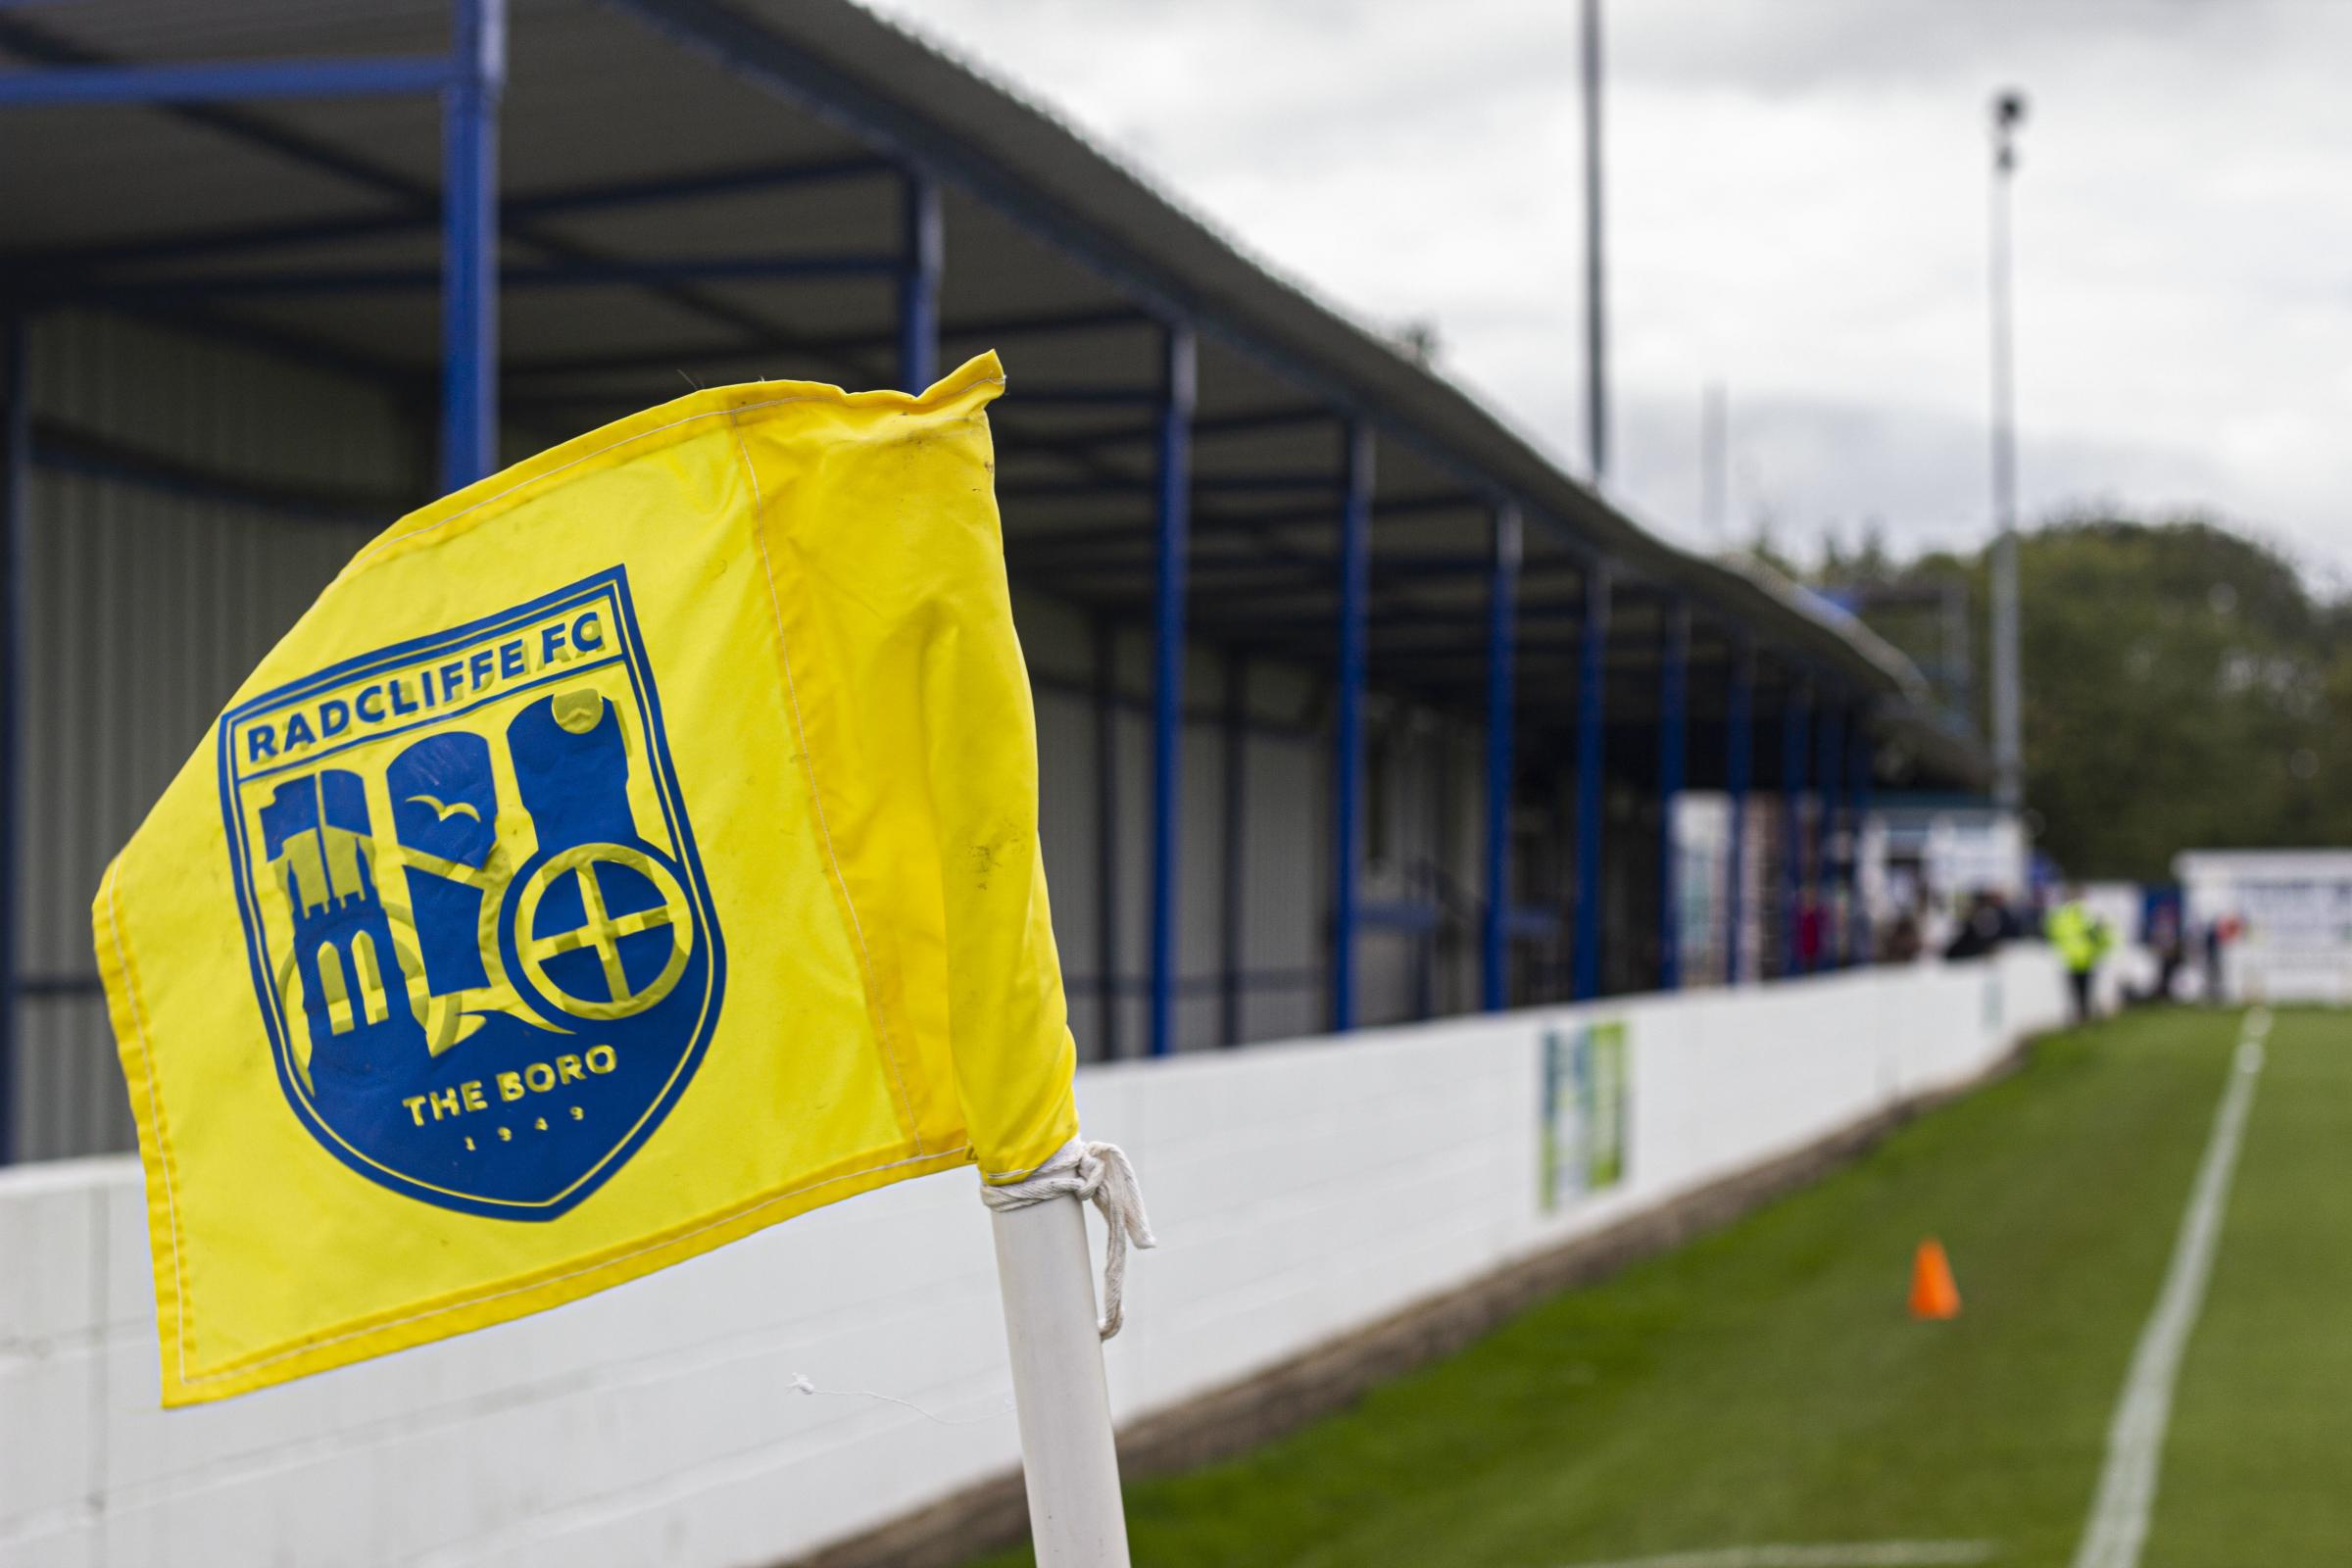 Radcliffe made to wait until 2021 as NPL opponents elect not to play